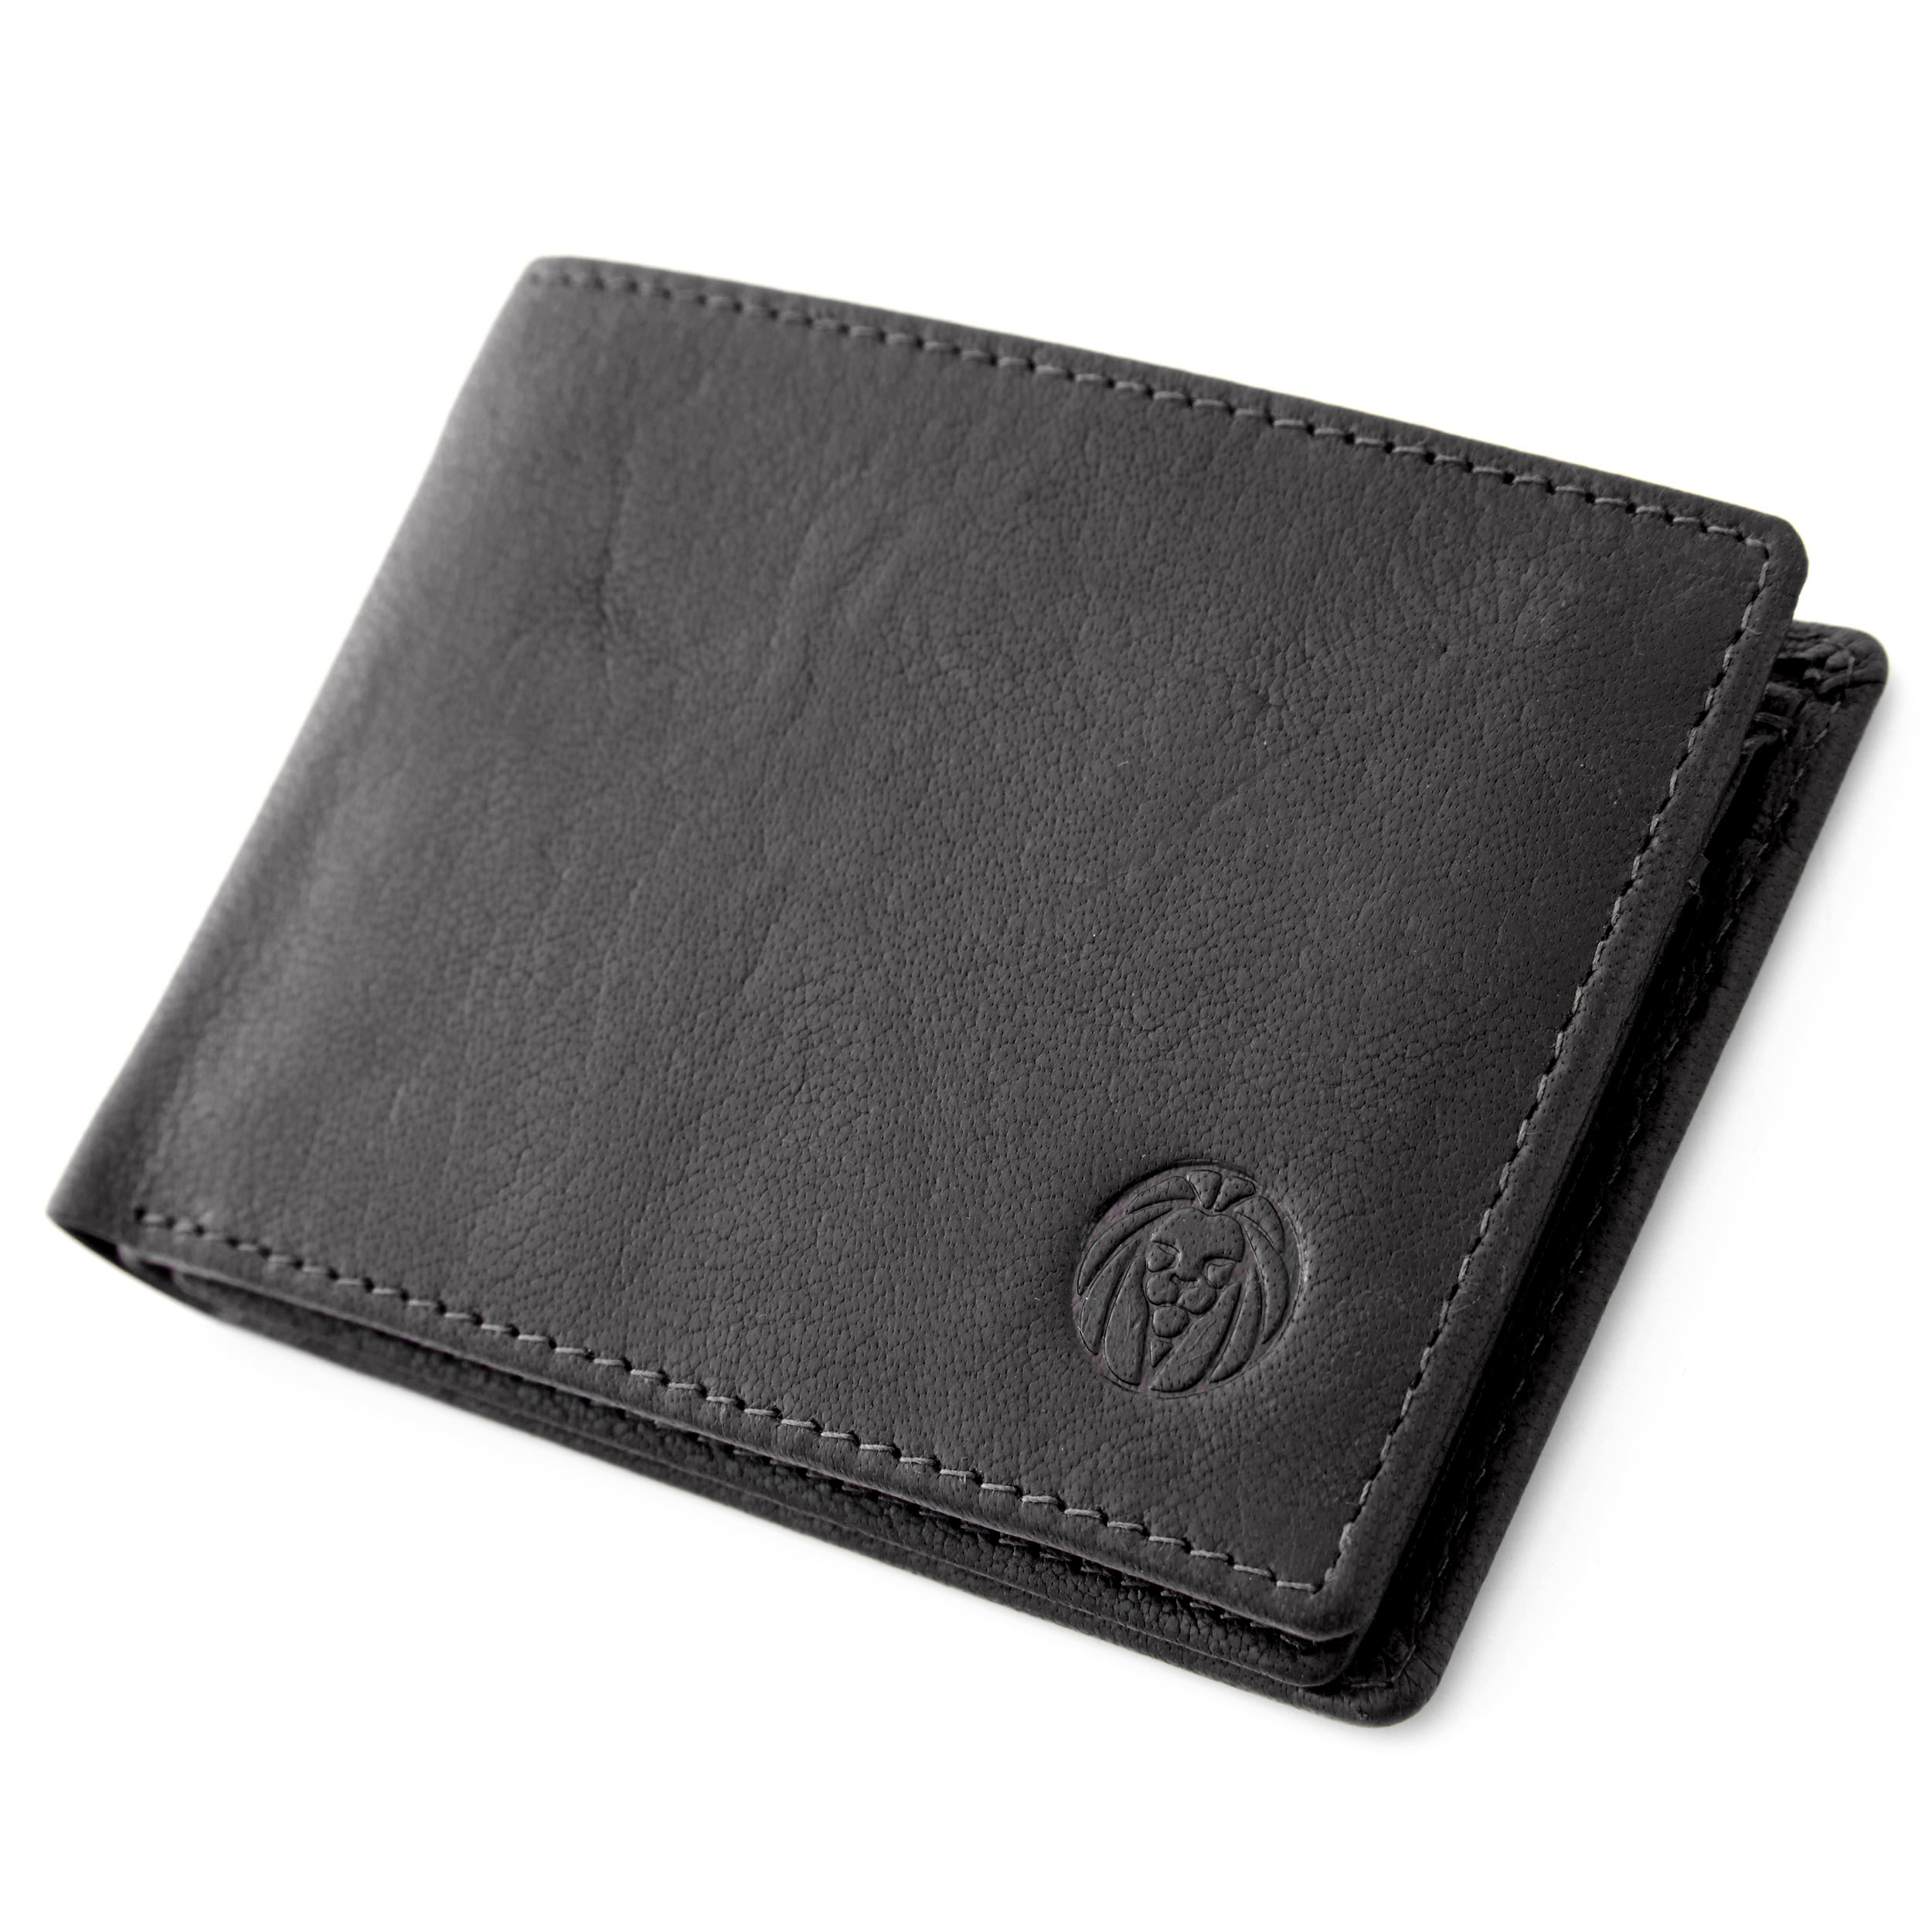 How to Choose the Right Men's Wallet – 5 Quick Tips